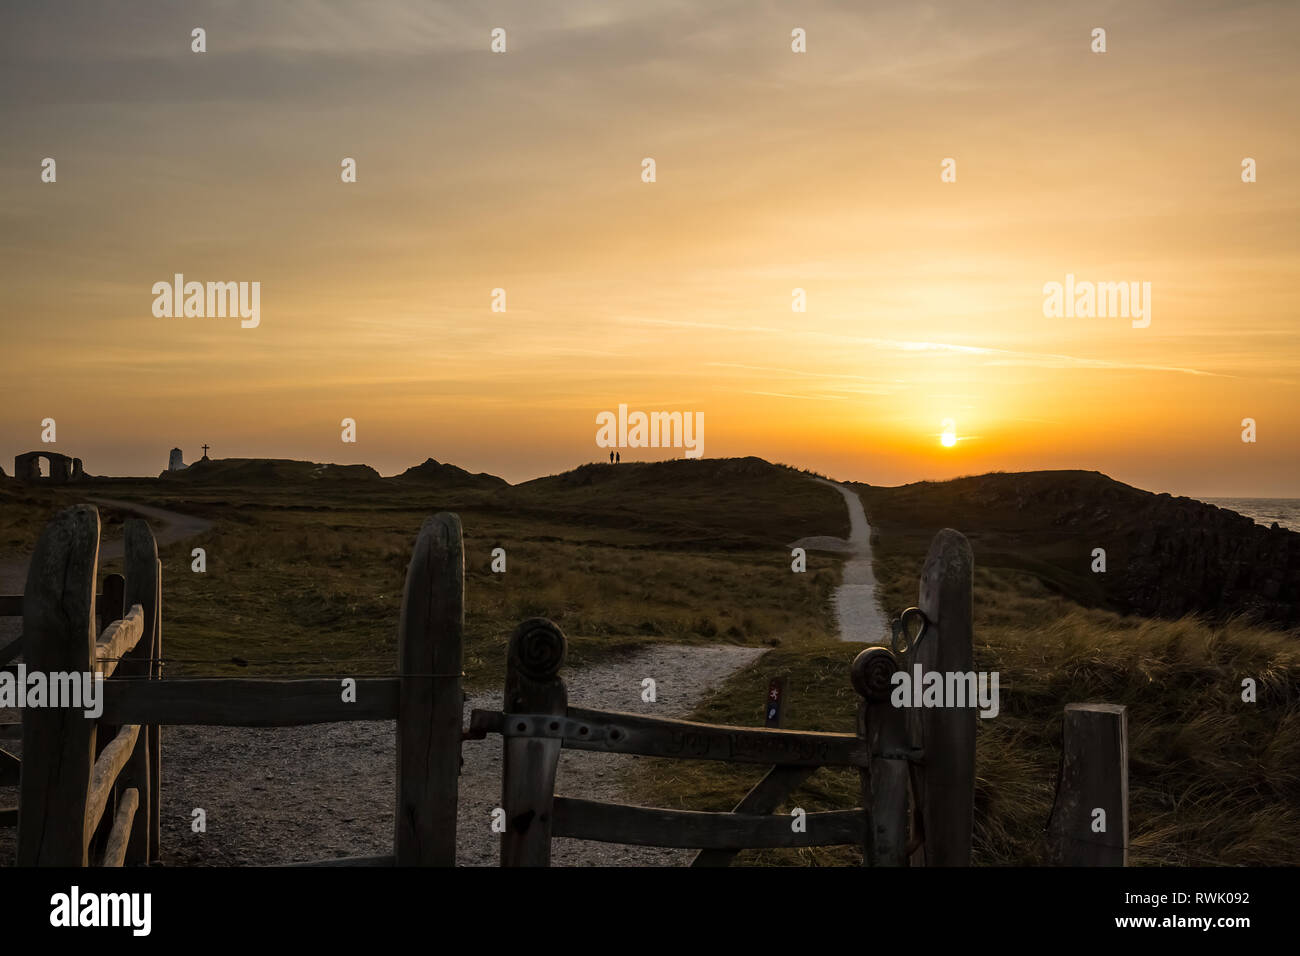 Golden winter sunset, Llanddwyn Island, Anglesey. View of coastal path along peninsula sunlit wooden gates in foreground, naturally lit by setting sun. Stock Photo